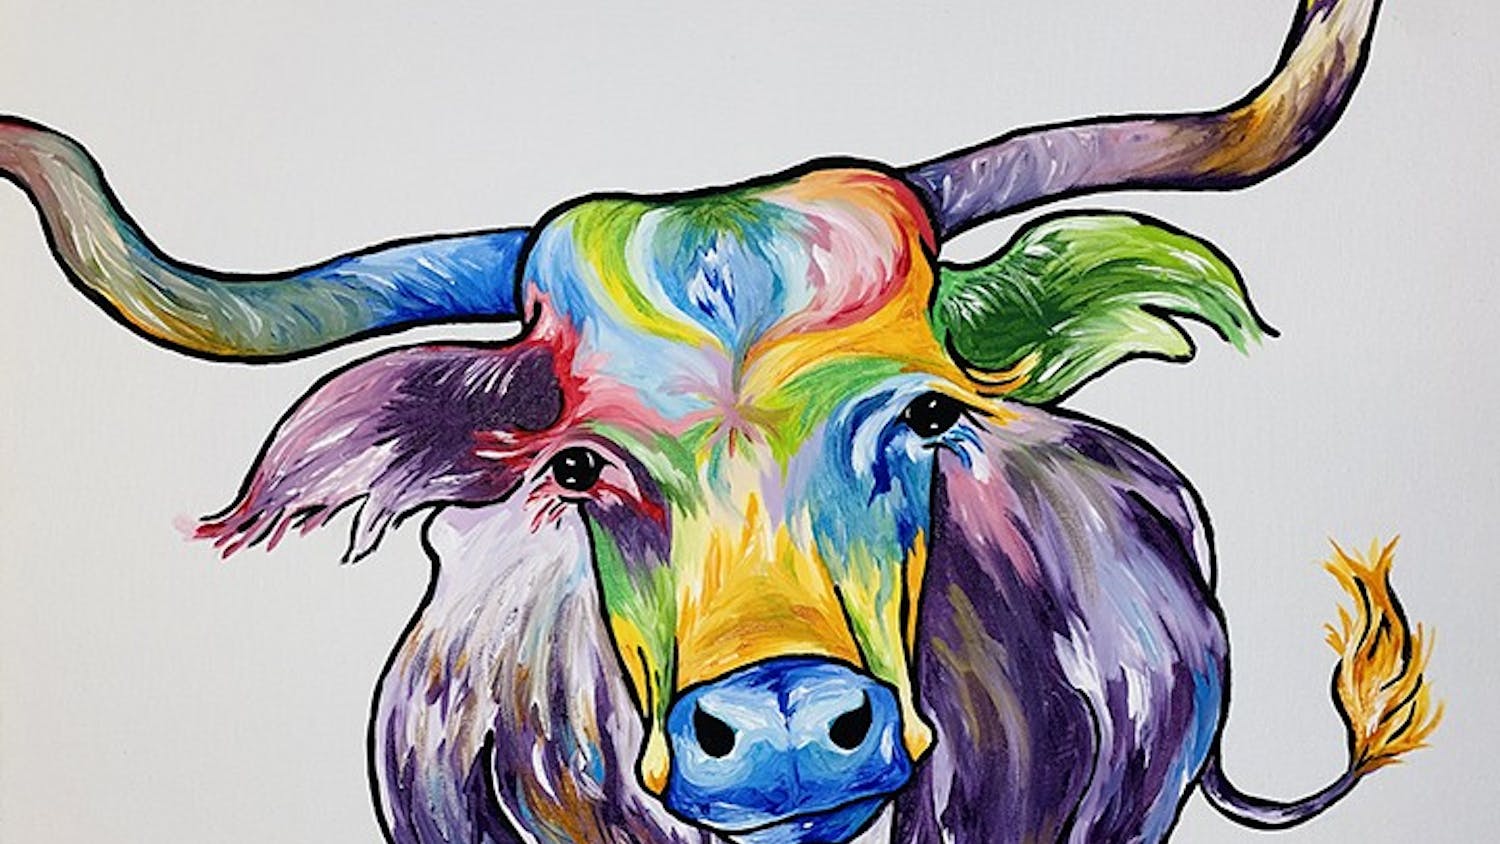 One of Jennings many projects depicts a bull made up of many bright colors.